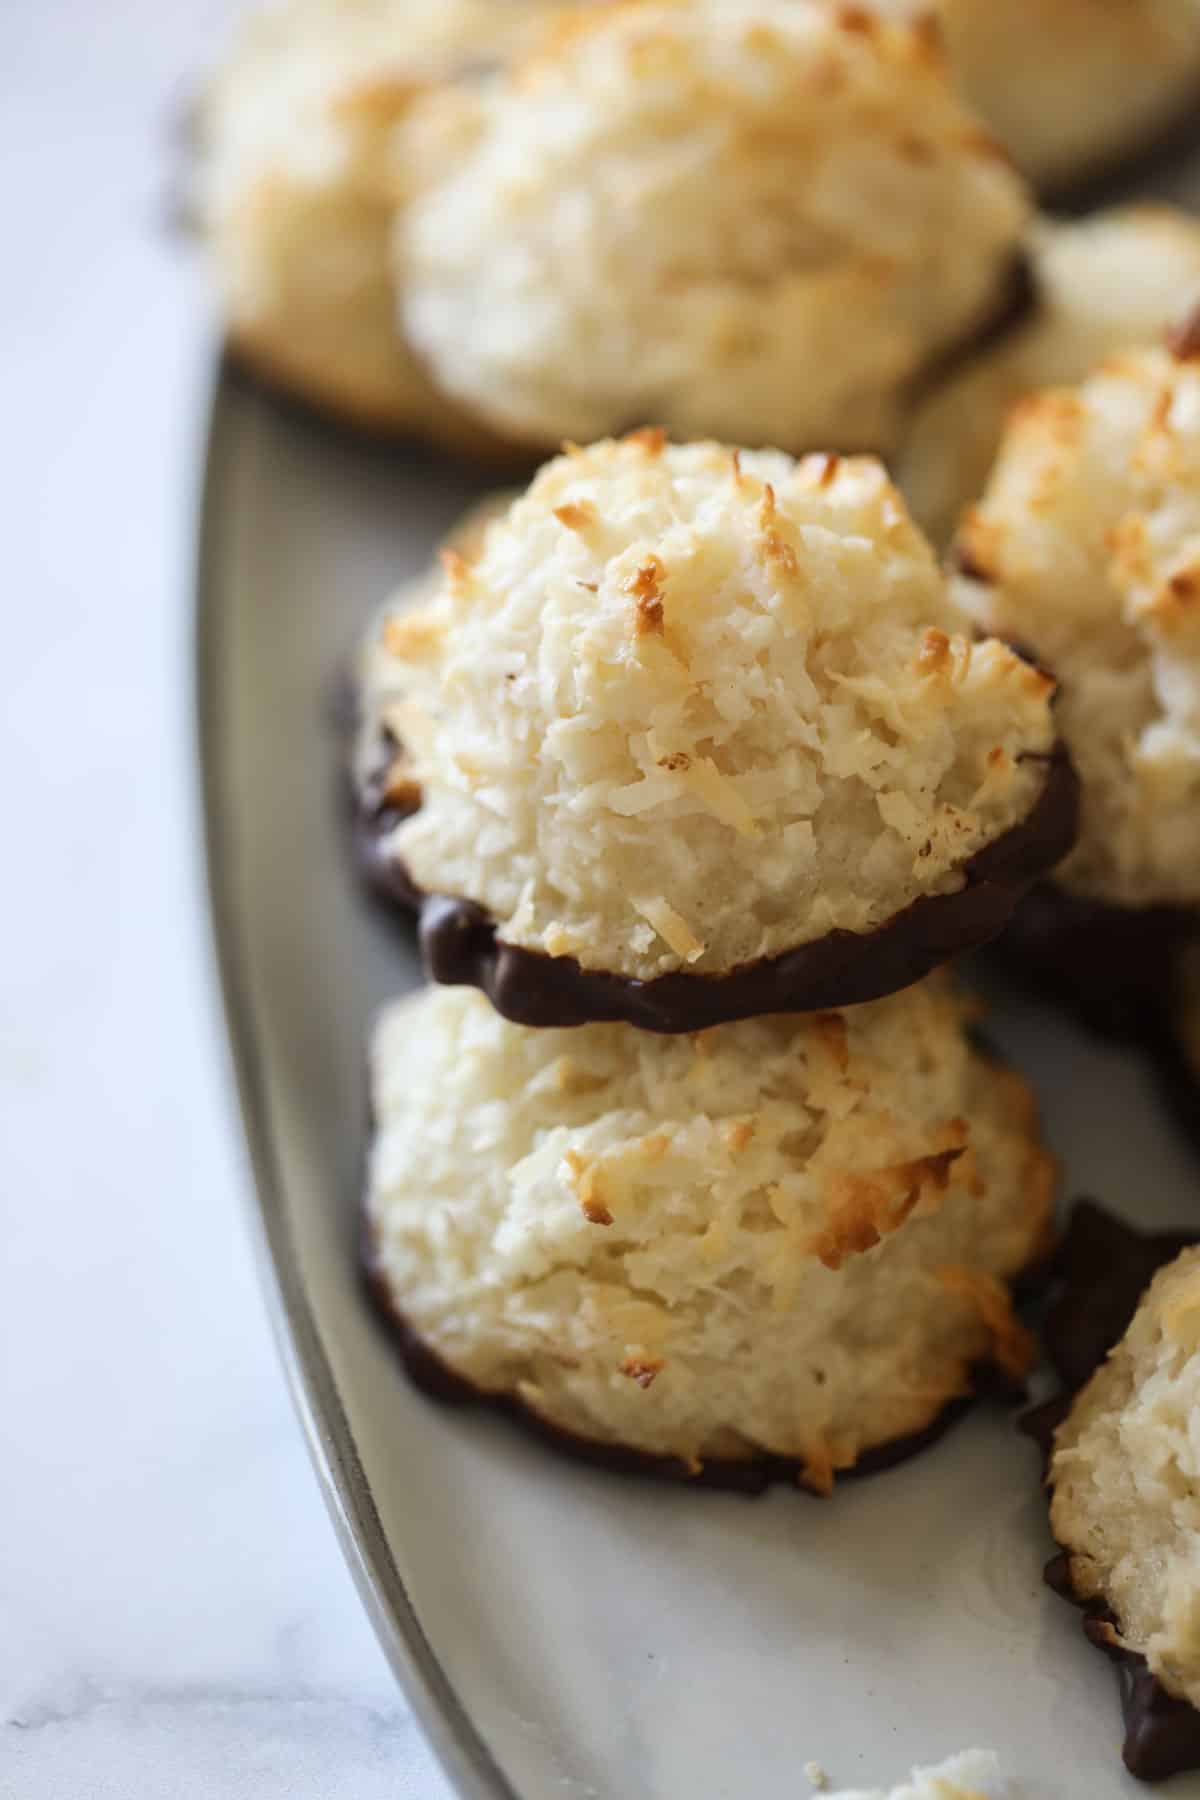 a coconut macaroon with chocolate bottom